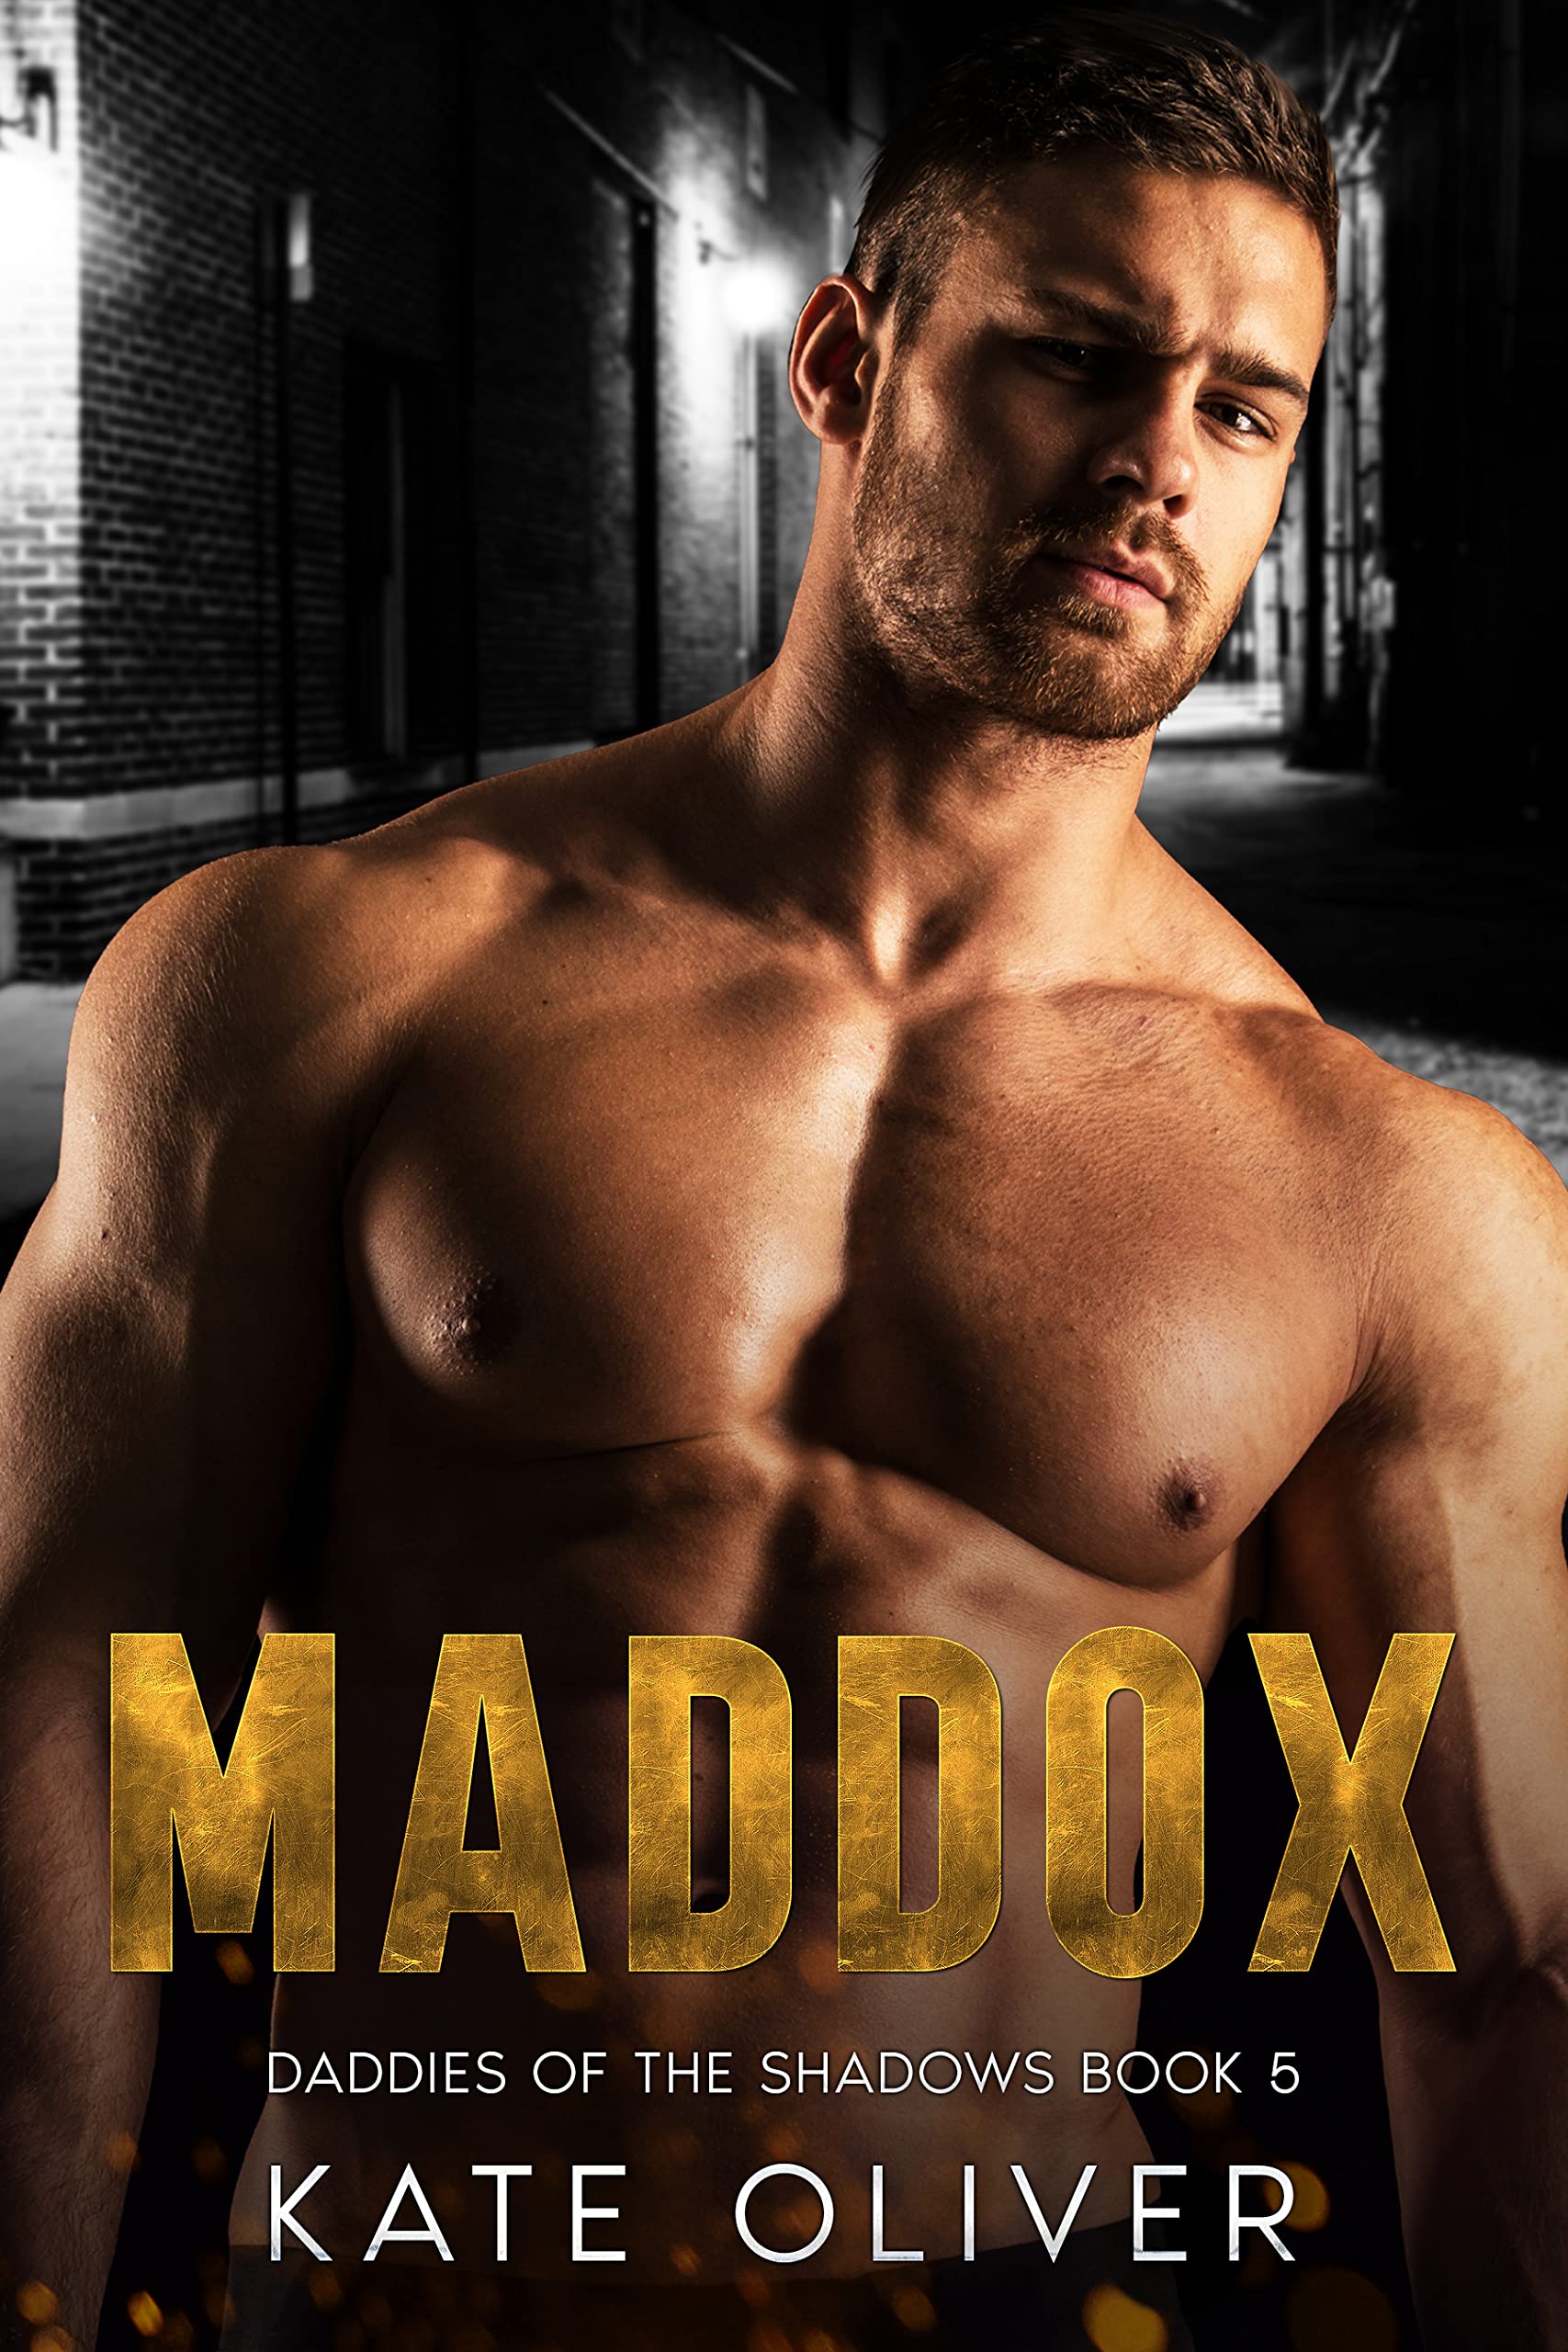 Maddox by Kate Oliver